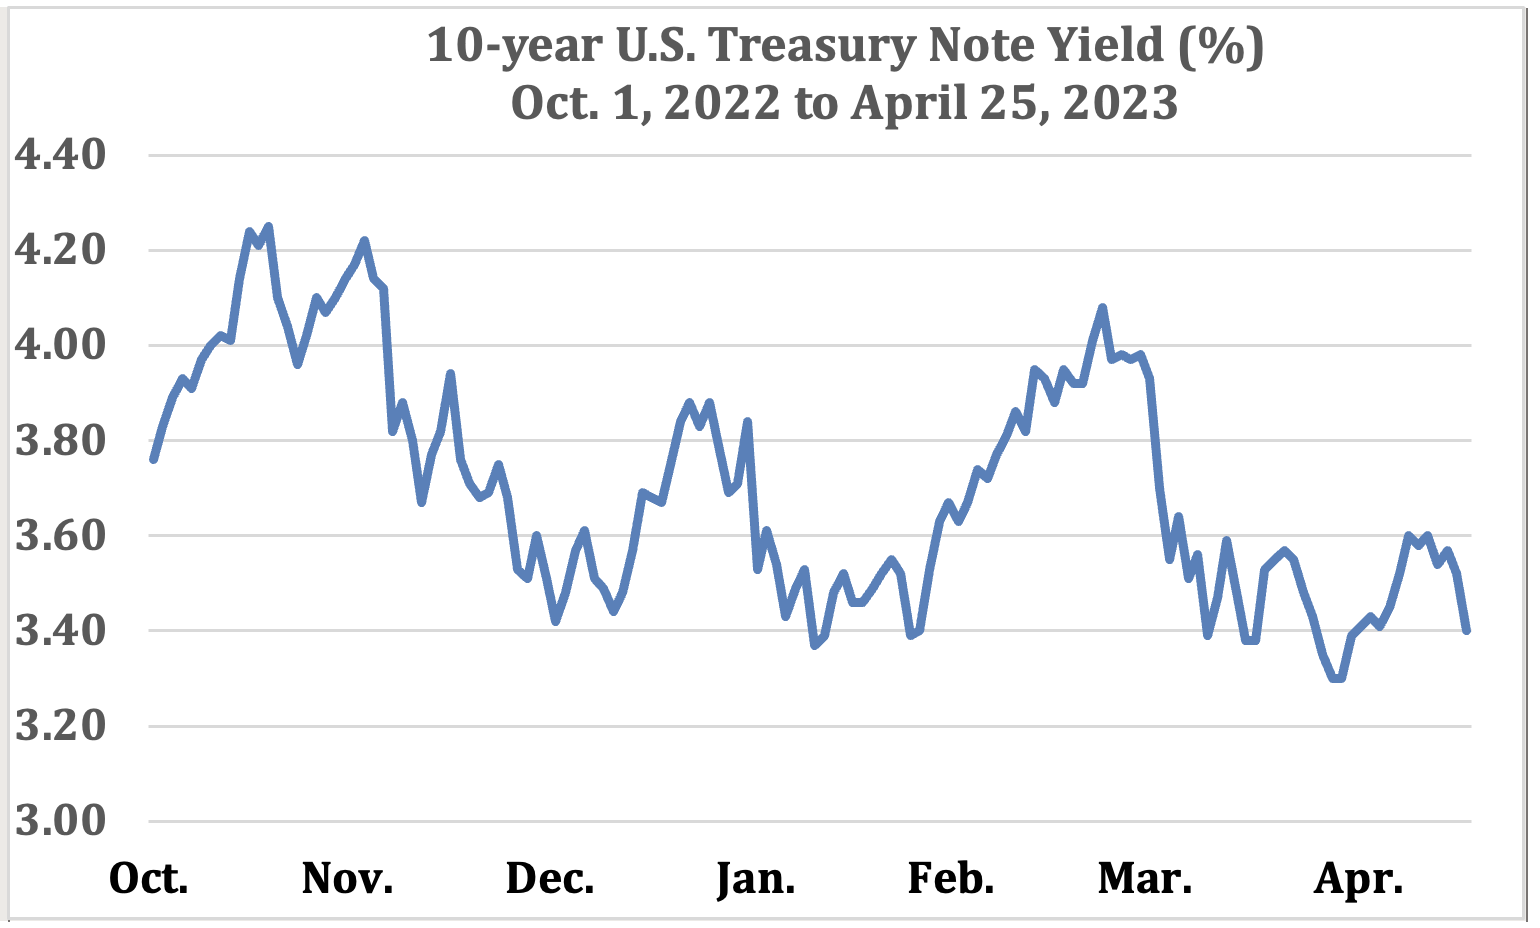 U.S. Department of the Treasury, Daily Treasury Part Yield Curve Rates.